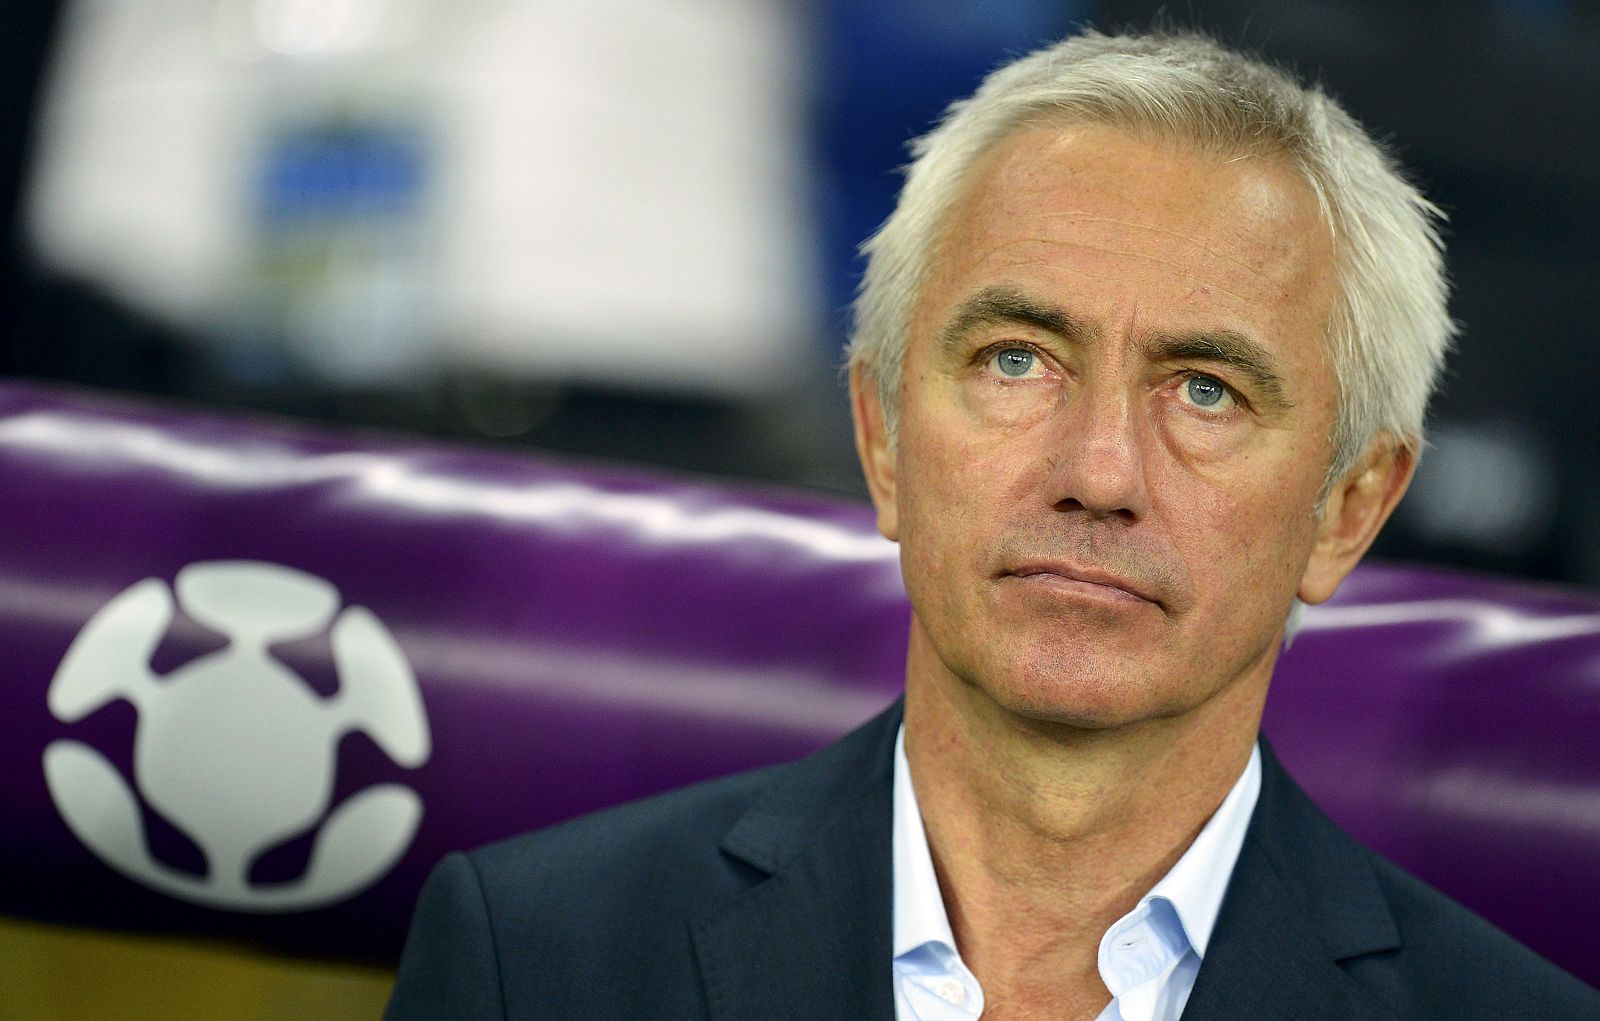 Netherlands' coach van Marwijk is pictured before their Group B Euro 2012 soccer match against Portugal at the Metalist stadium in Kharkiv